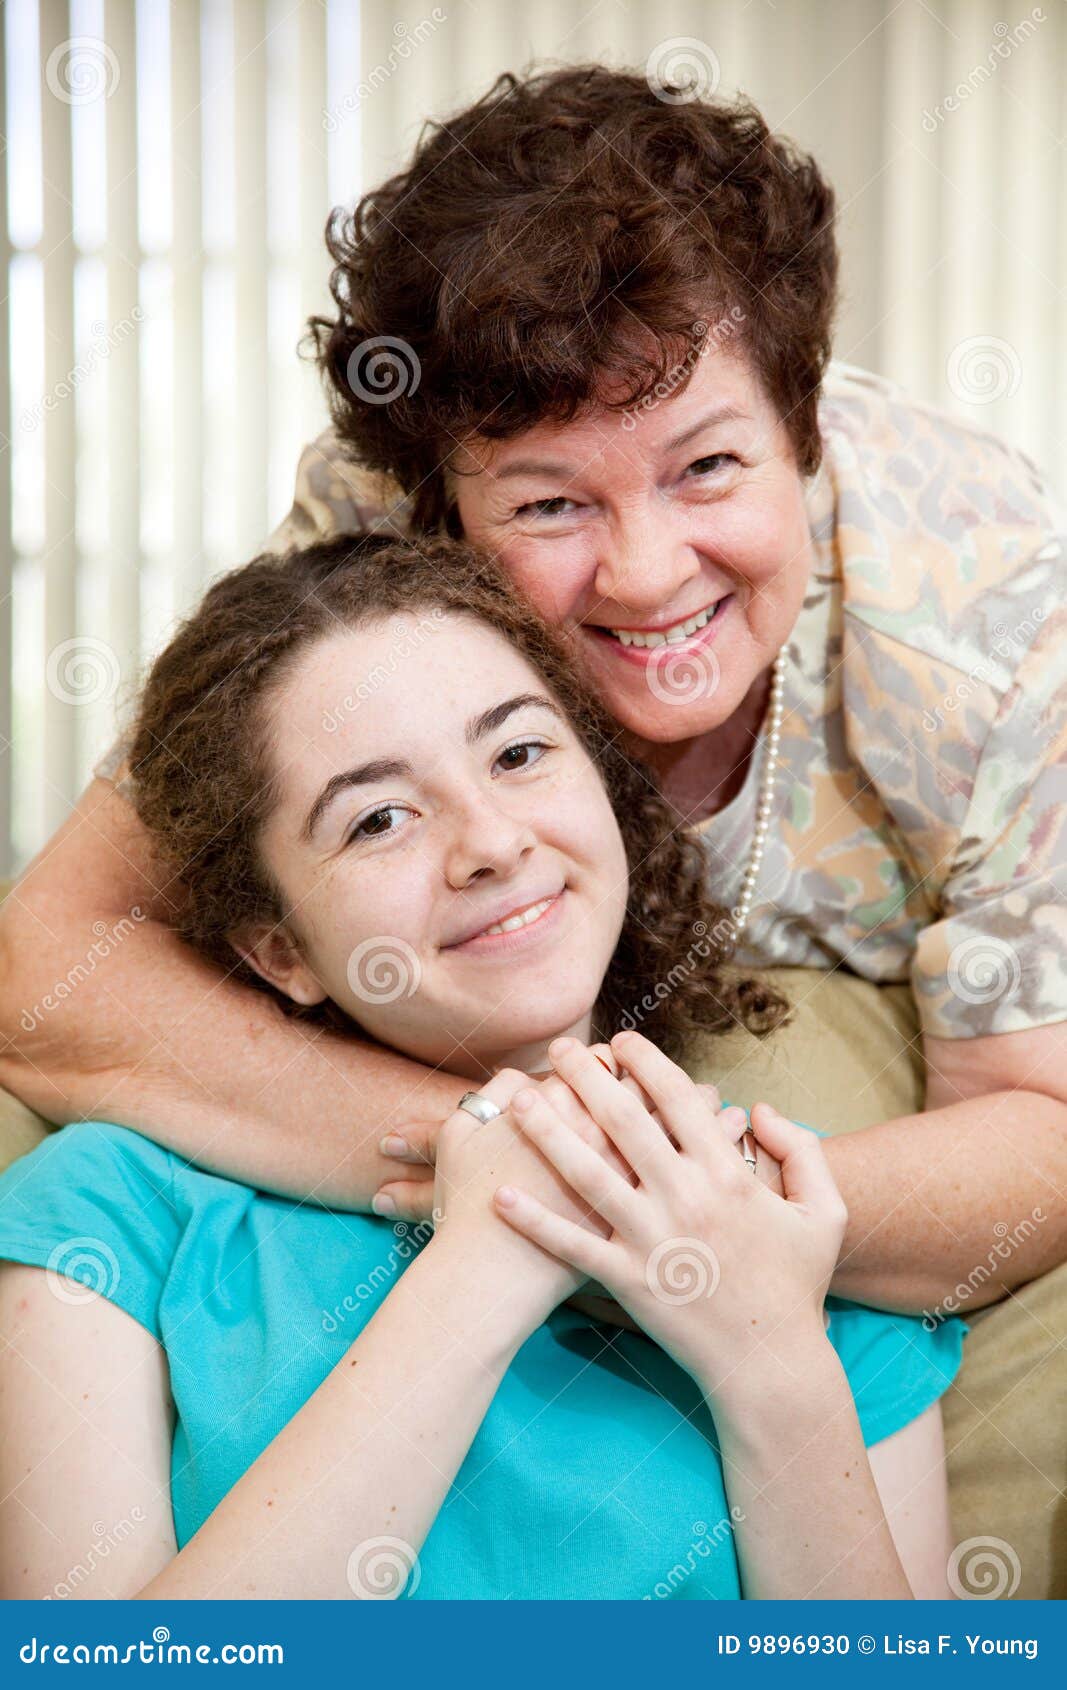 Mom Loves Teen Daughter stock photo picture